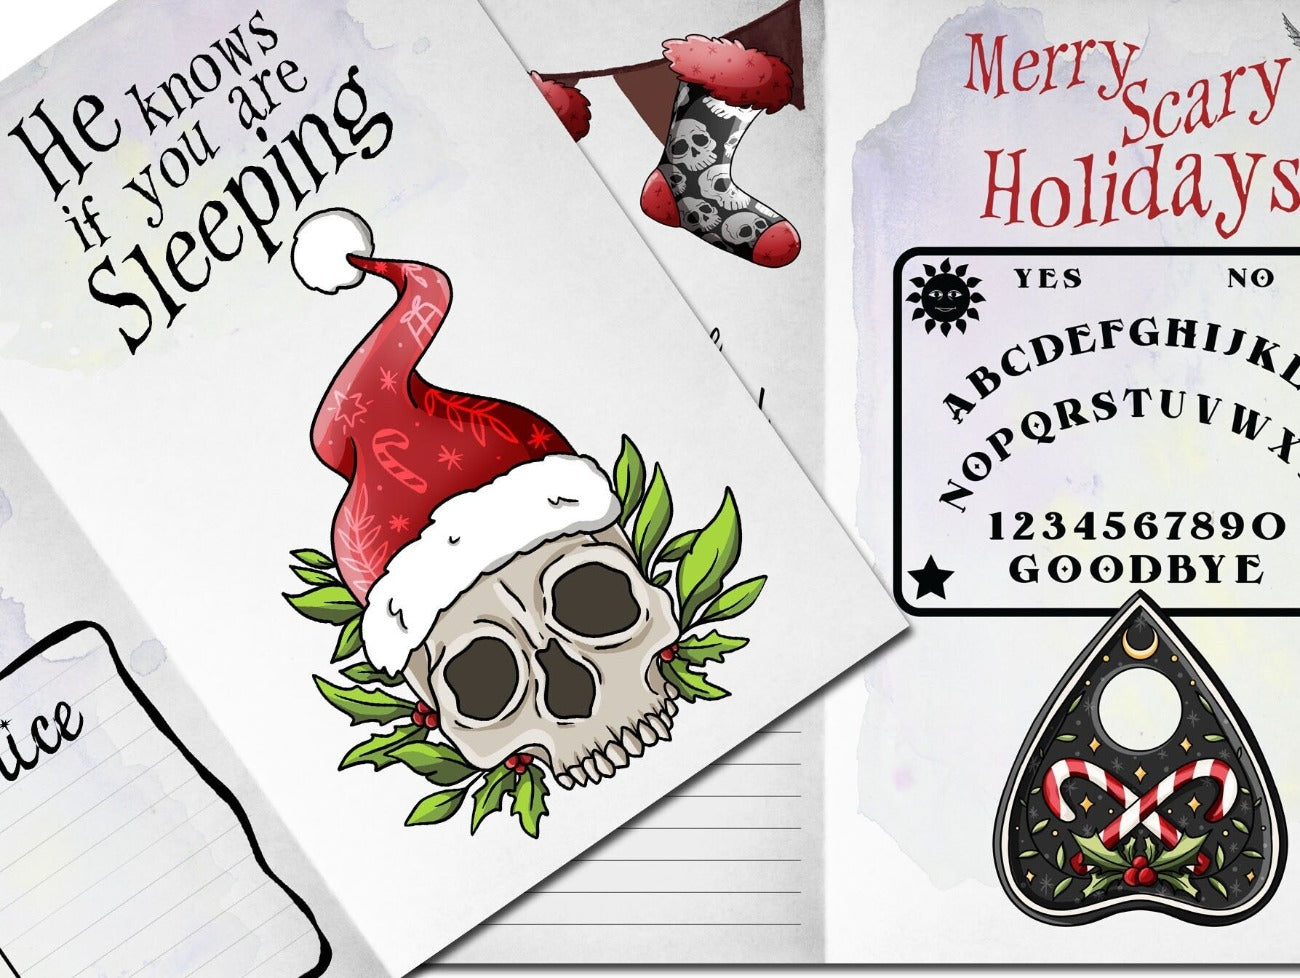 SCARY CHRISTMAS Junk Journal He Knows When you are Sleeping, Merry Scary Holidays Pages - Morgana Magick Spell